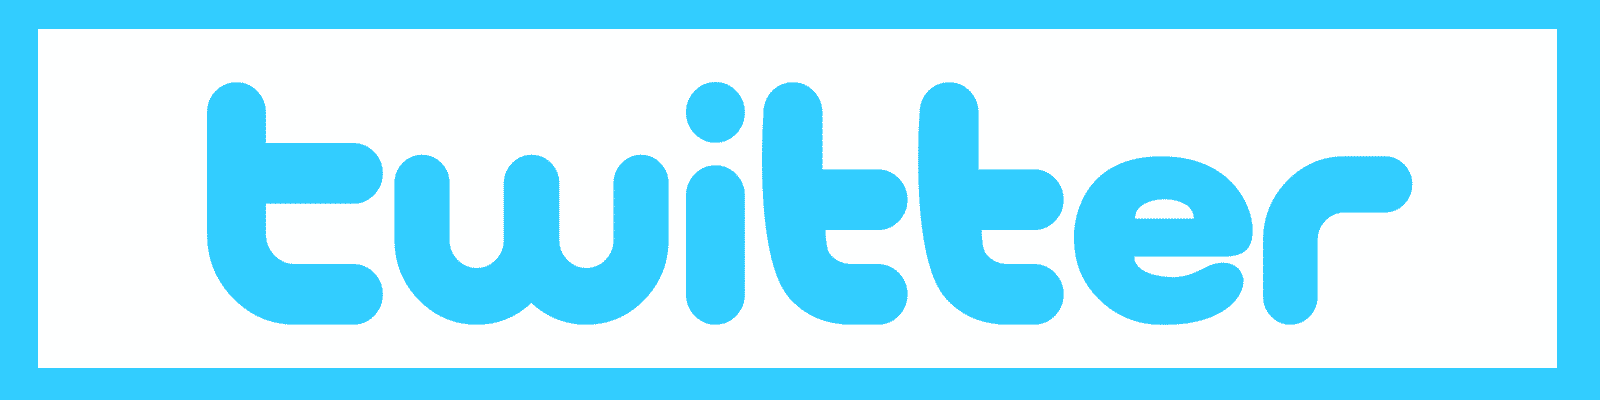 Twitter logo for What Is A Twitter Handle article